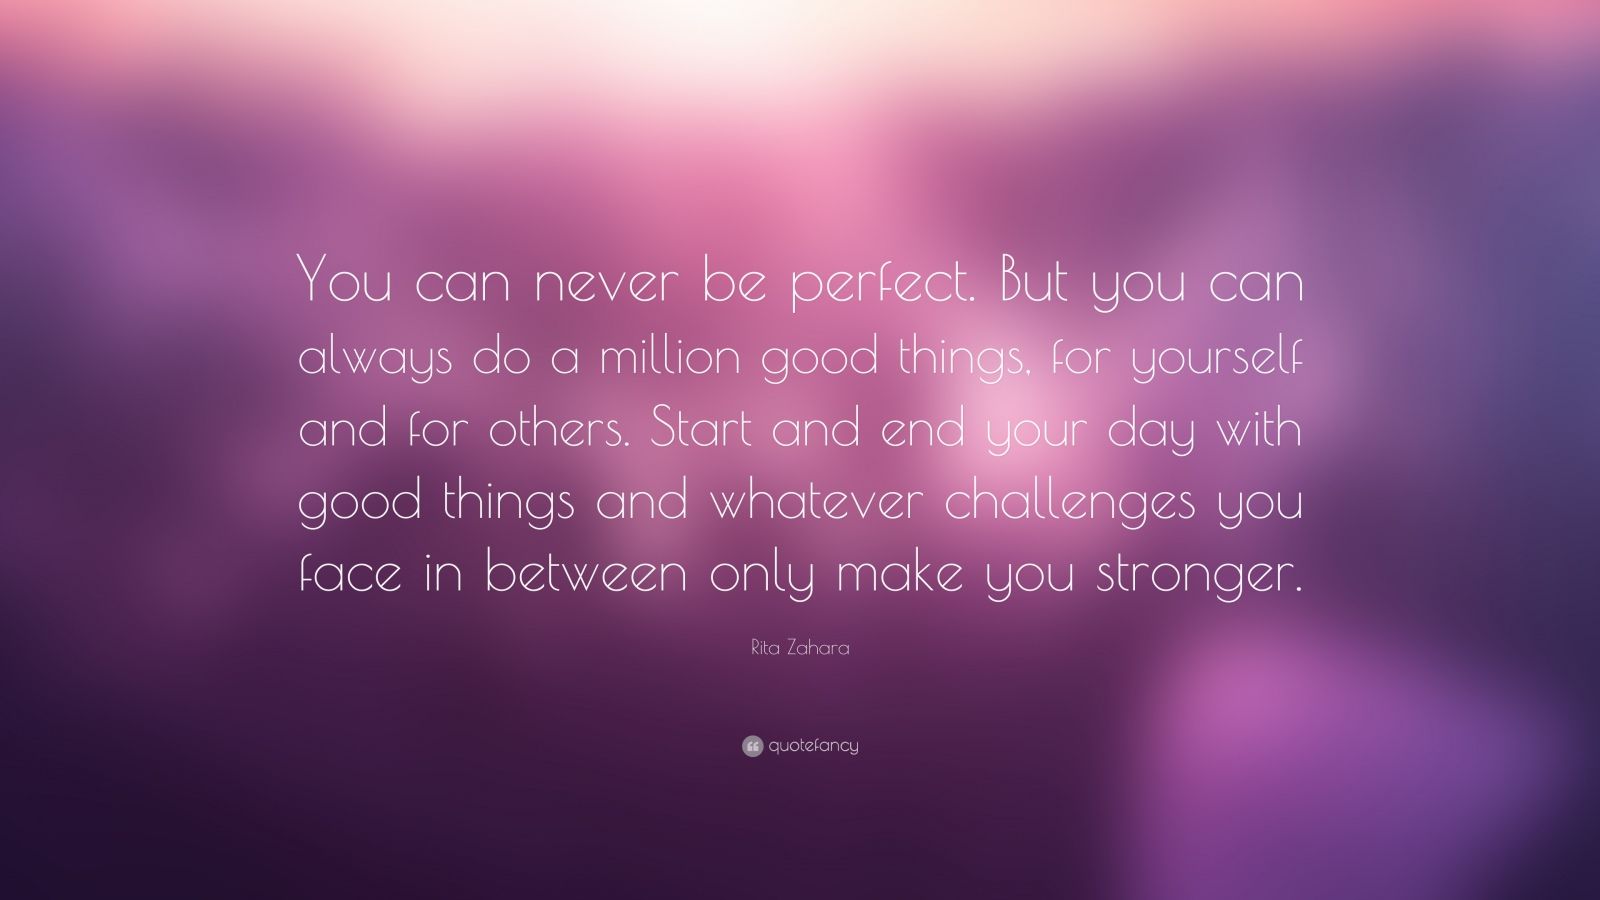 Rita Zahara Quote: “You can never be perfect. But you can always do a ...